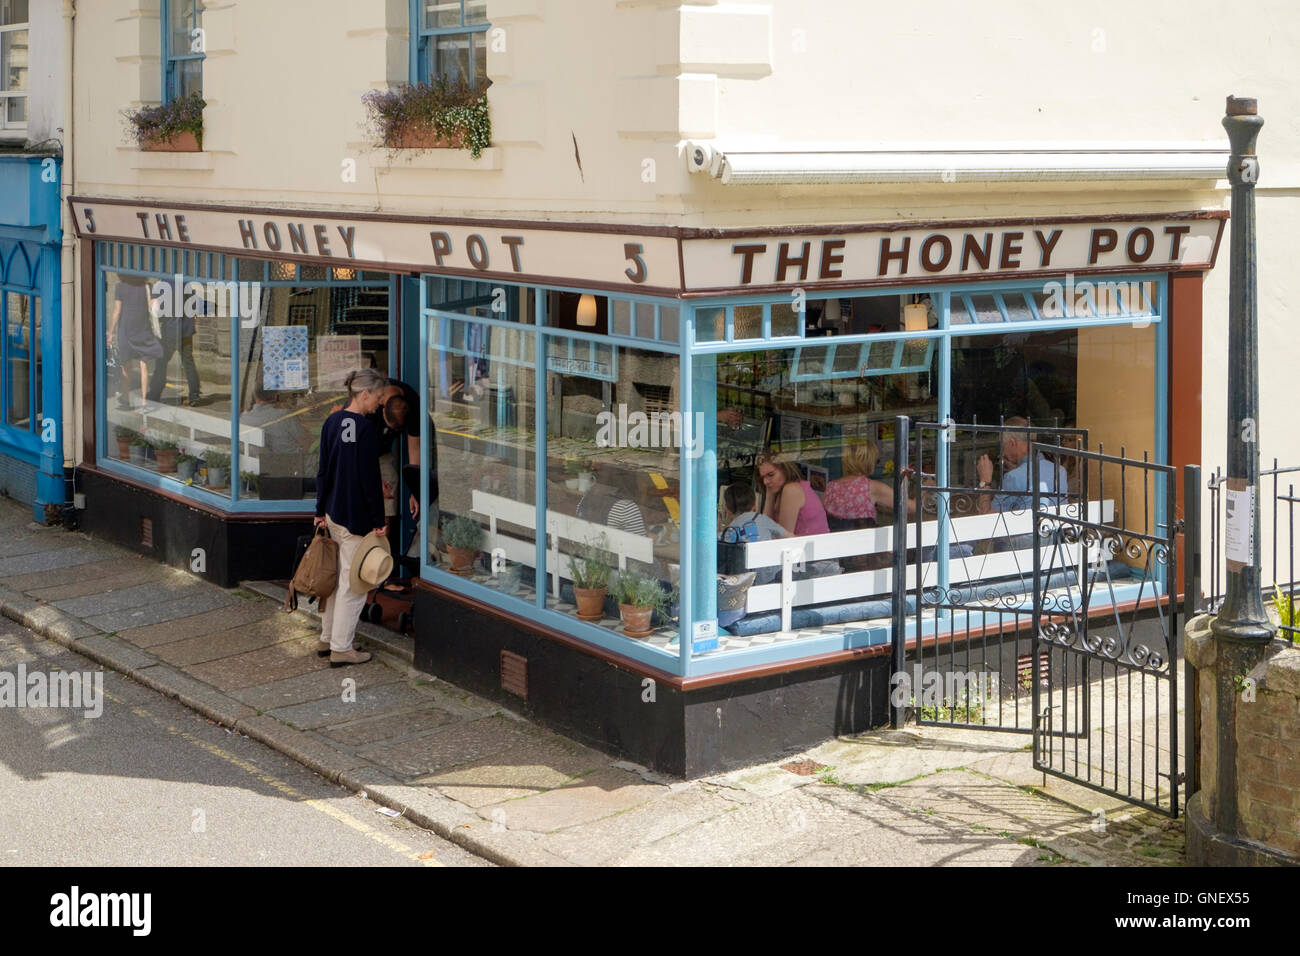 Penzance a town in West Cornwall England UK Honeypot cafe Stock Photo